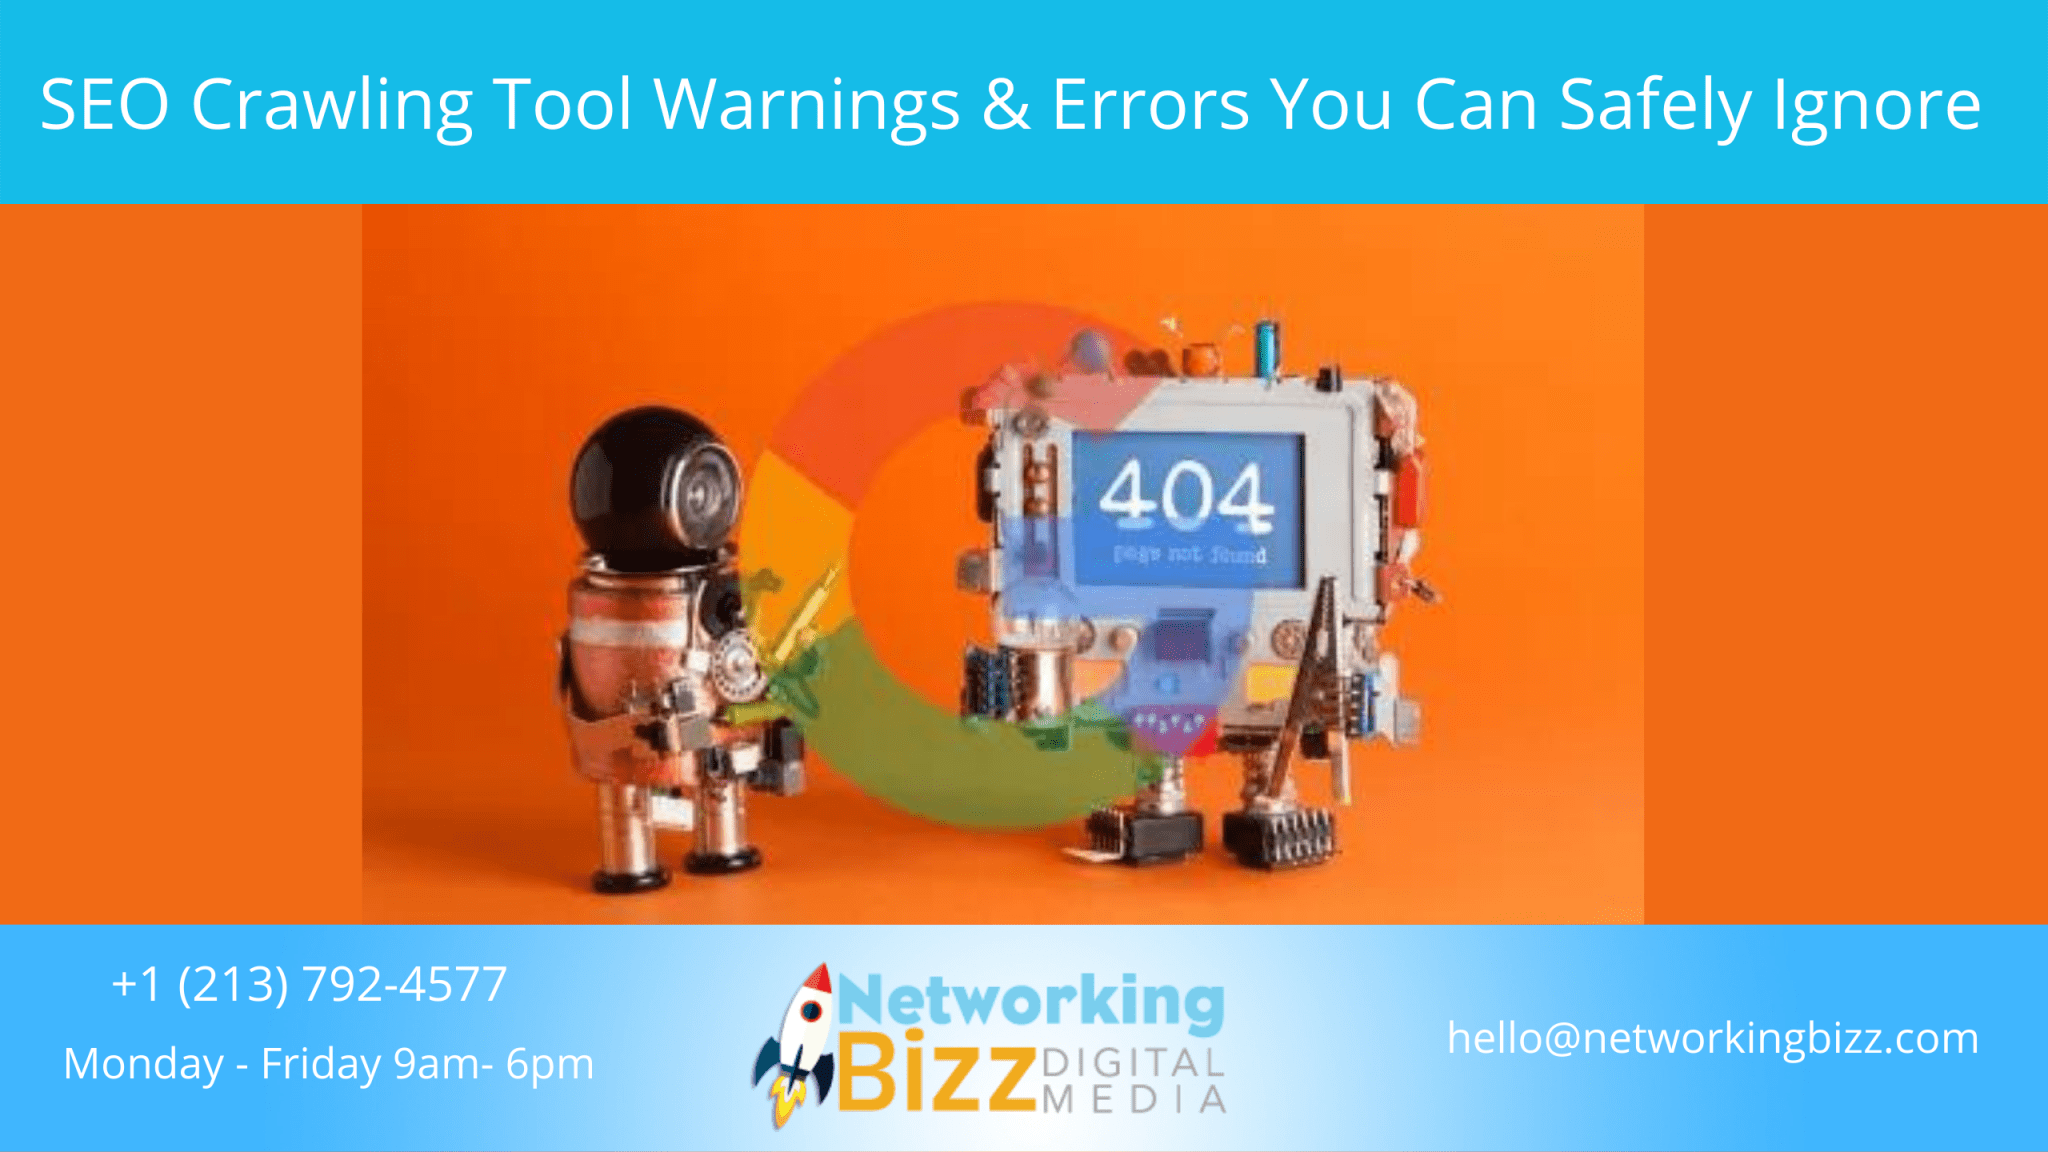 SEO Crawling Tool Warnings & Errors You Can Safely Ignore